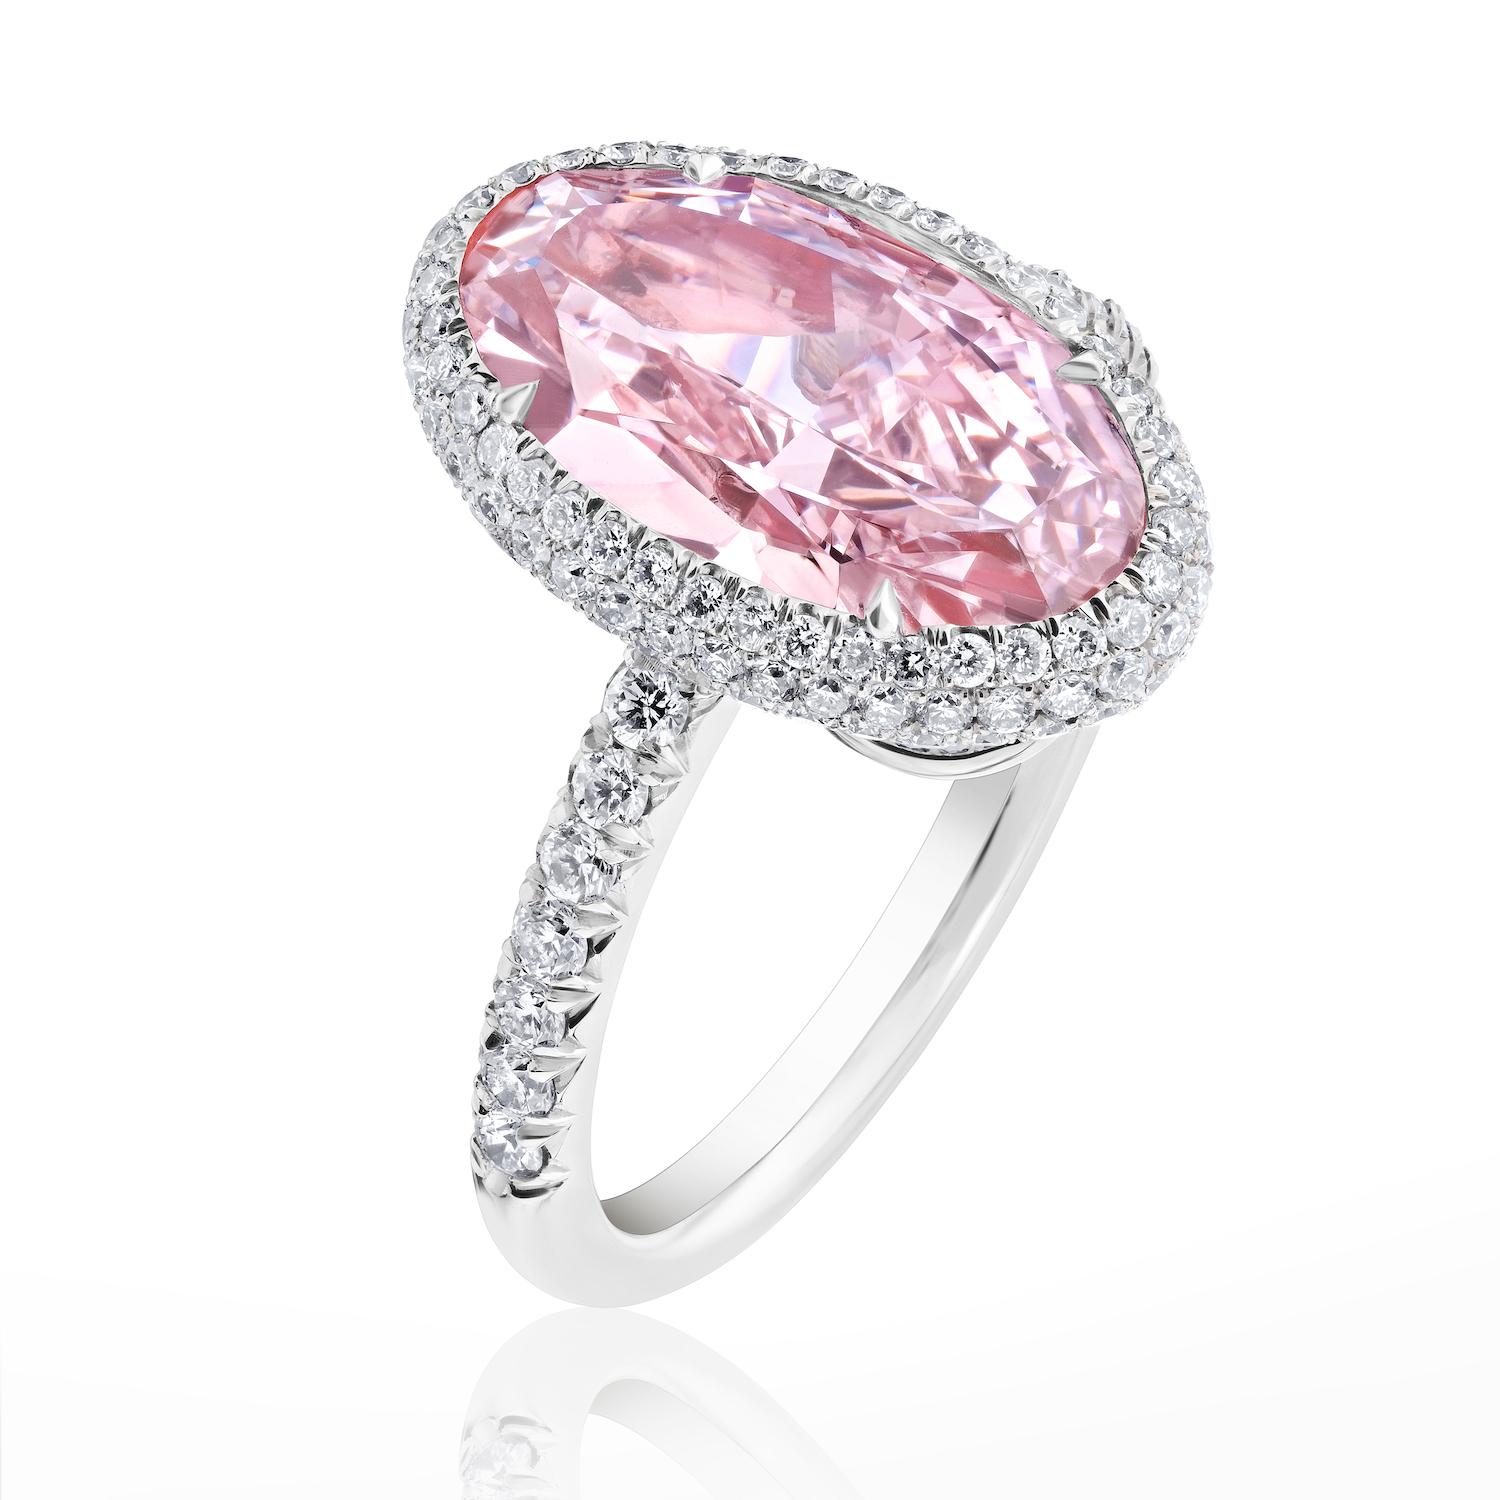 Louis Newman & Company 3 Carat GIA Certified Oval Pink Diamond Ring 2